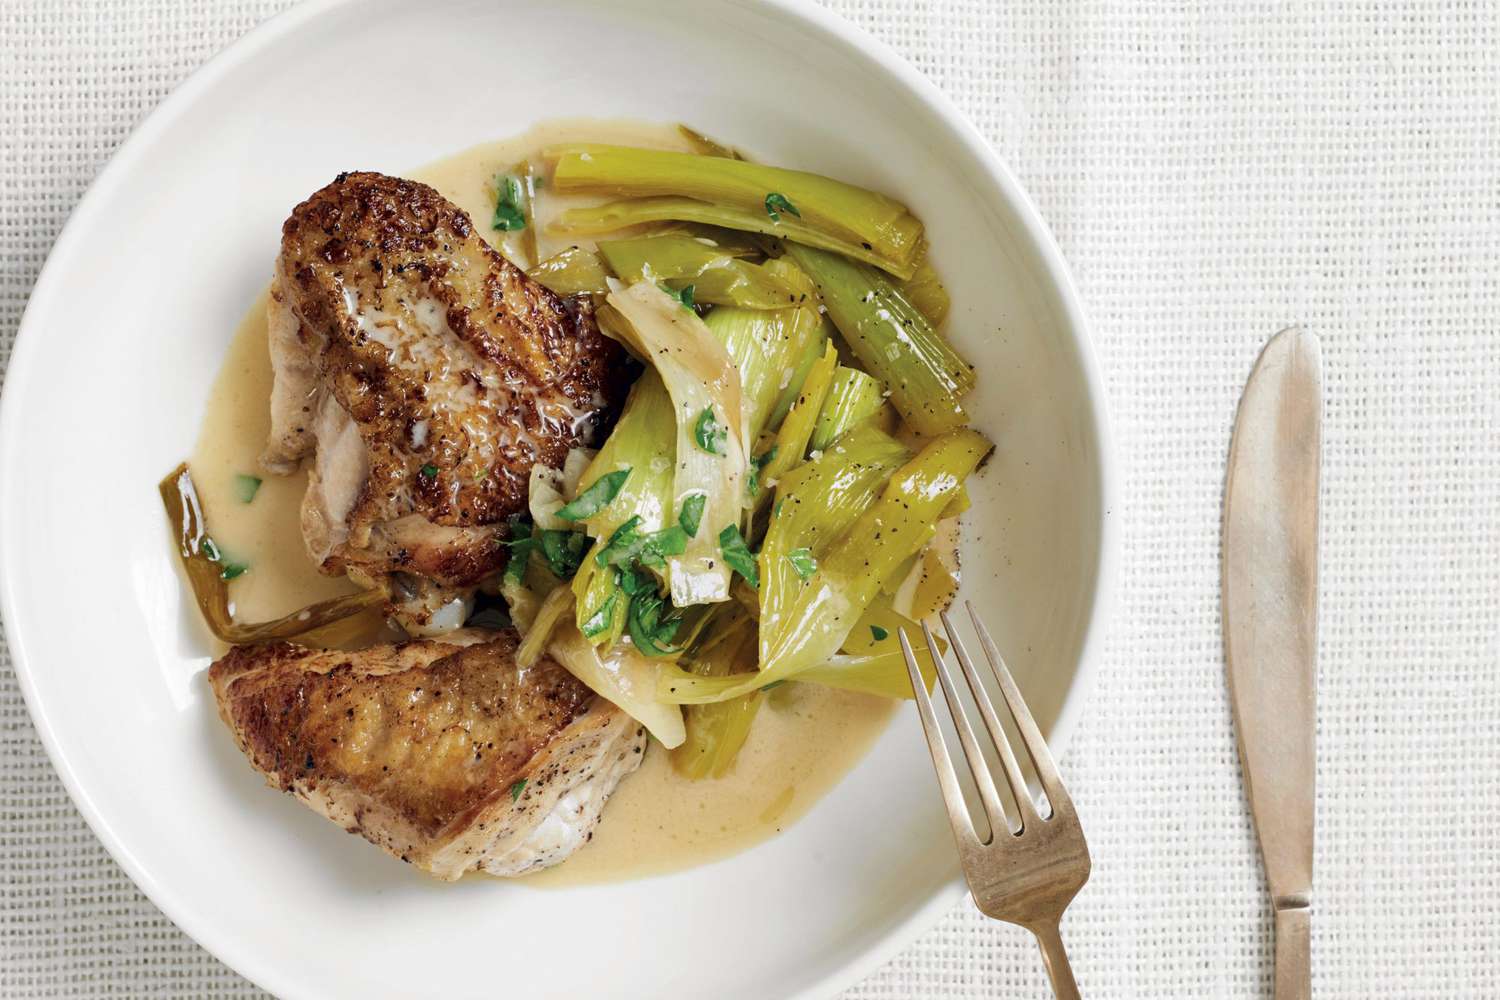 Normandy-Style Chicken and Leeks with Creme Fraiche